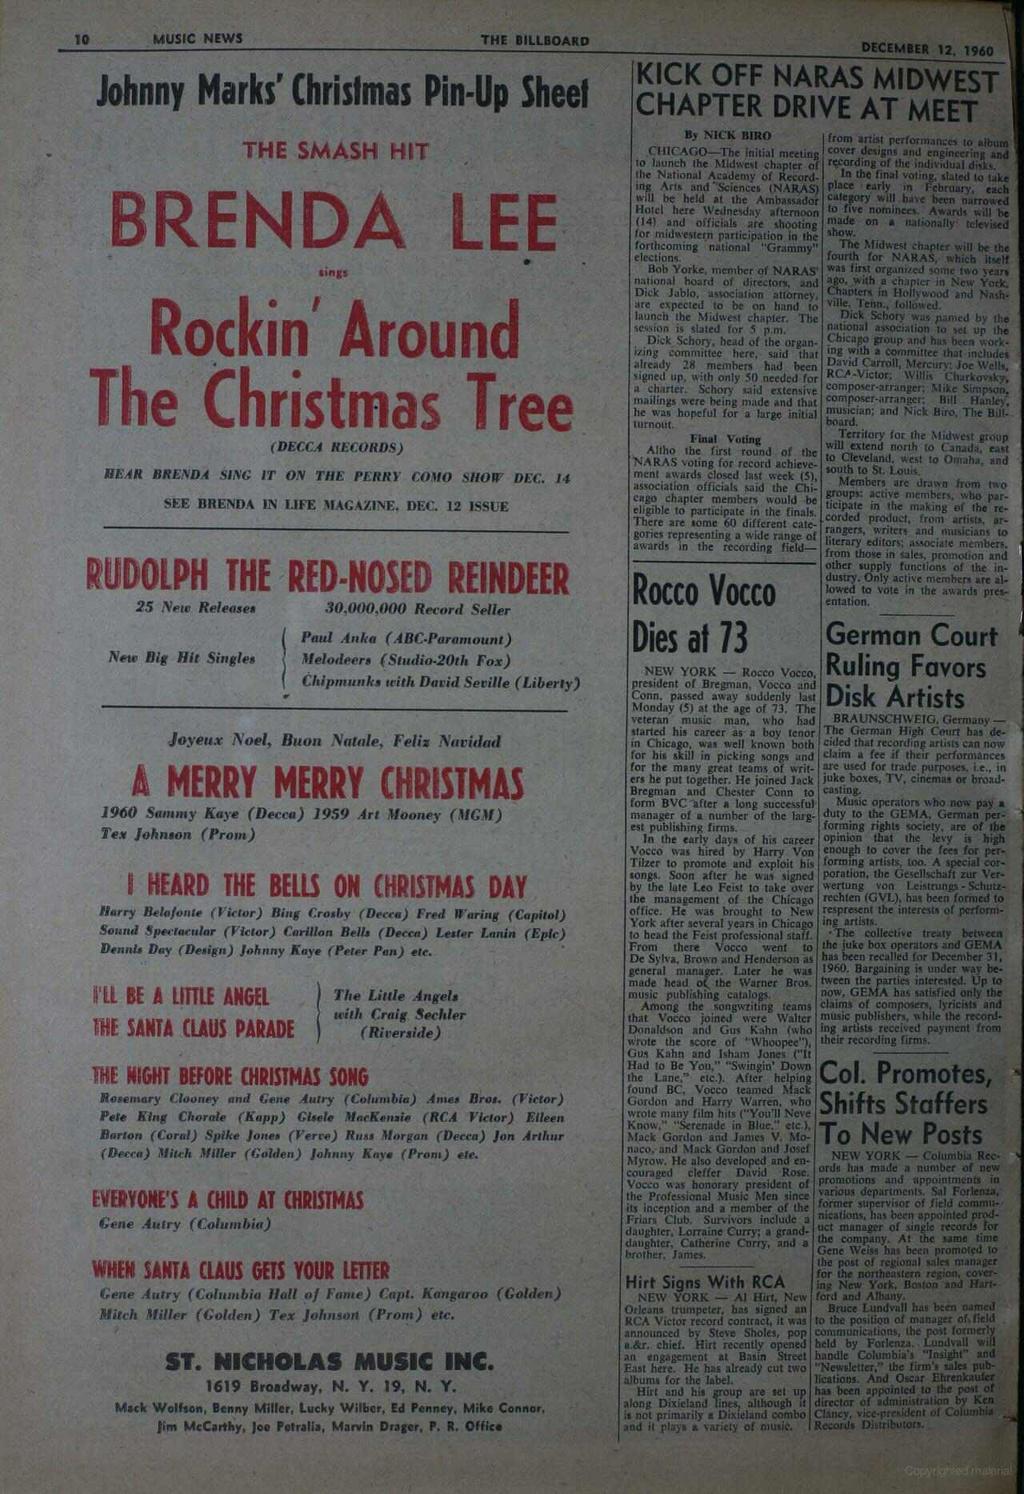 10 MUSIC NEWS THE BILLBOARD Johnny Marks' Christmas Pin -Up Shedf THE SMASH HIT BRENDA LEE Rockin' Around the Christmas Tree ( DECCA RECORDS) BEAR BRENDA SING IT ON THE PERRY COMO SHOW DEC.